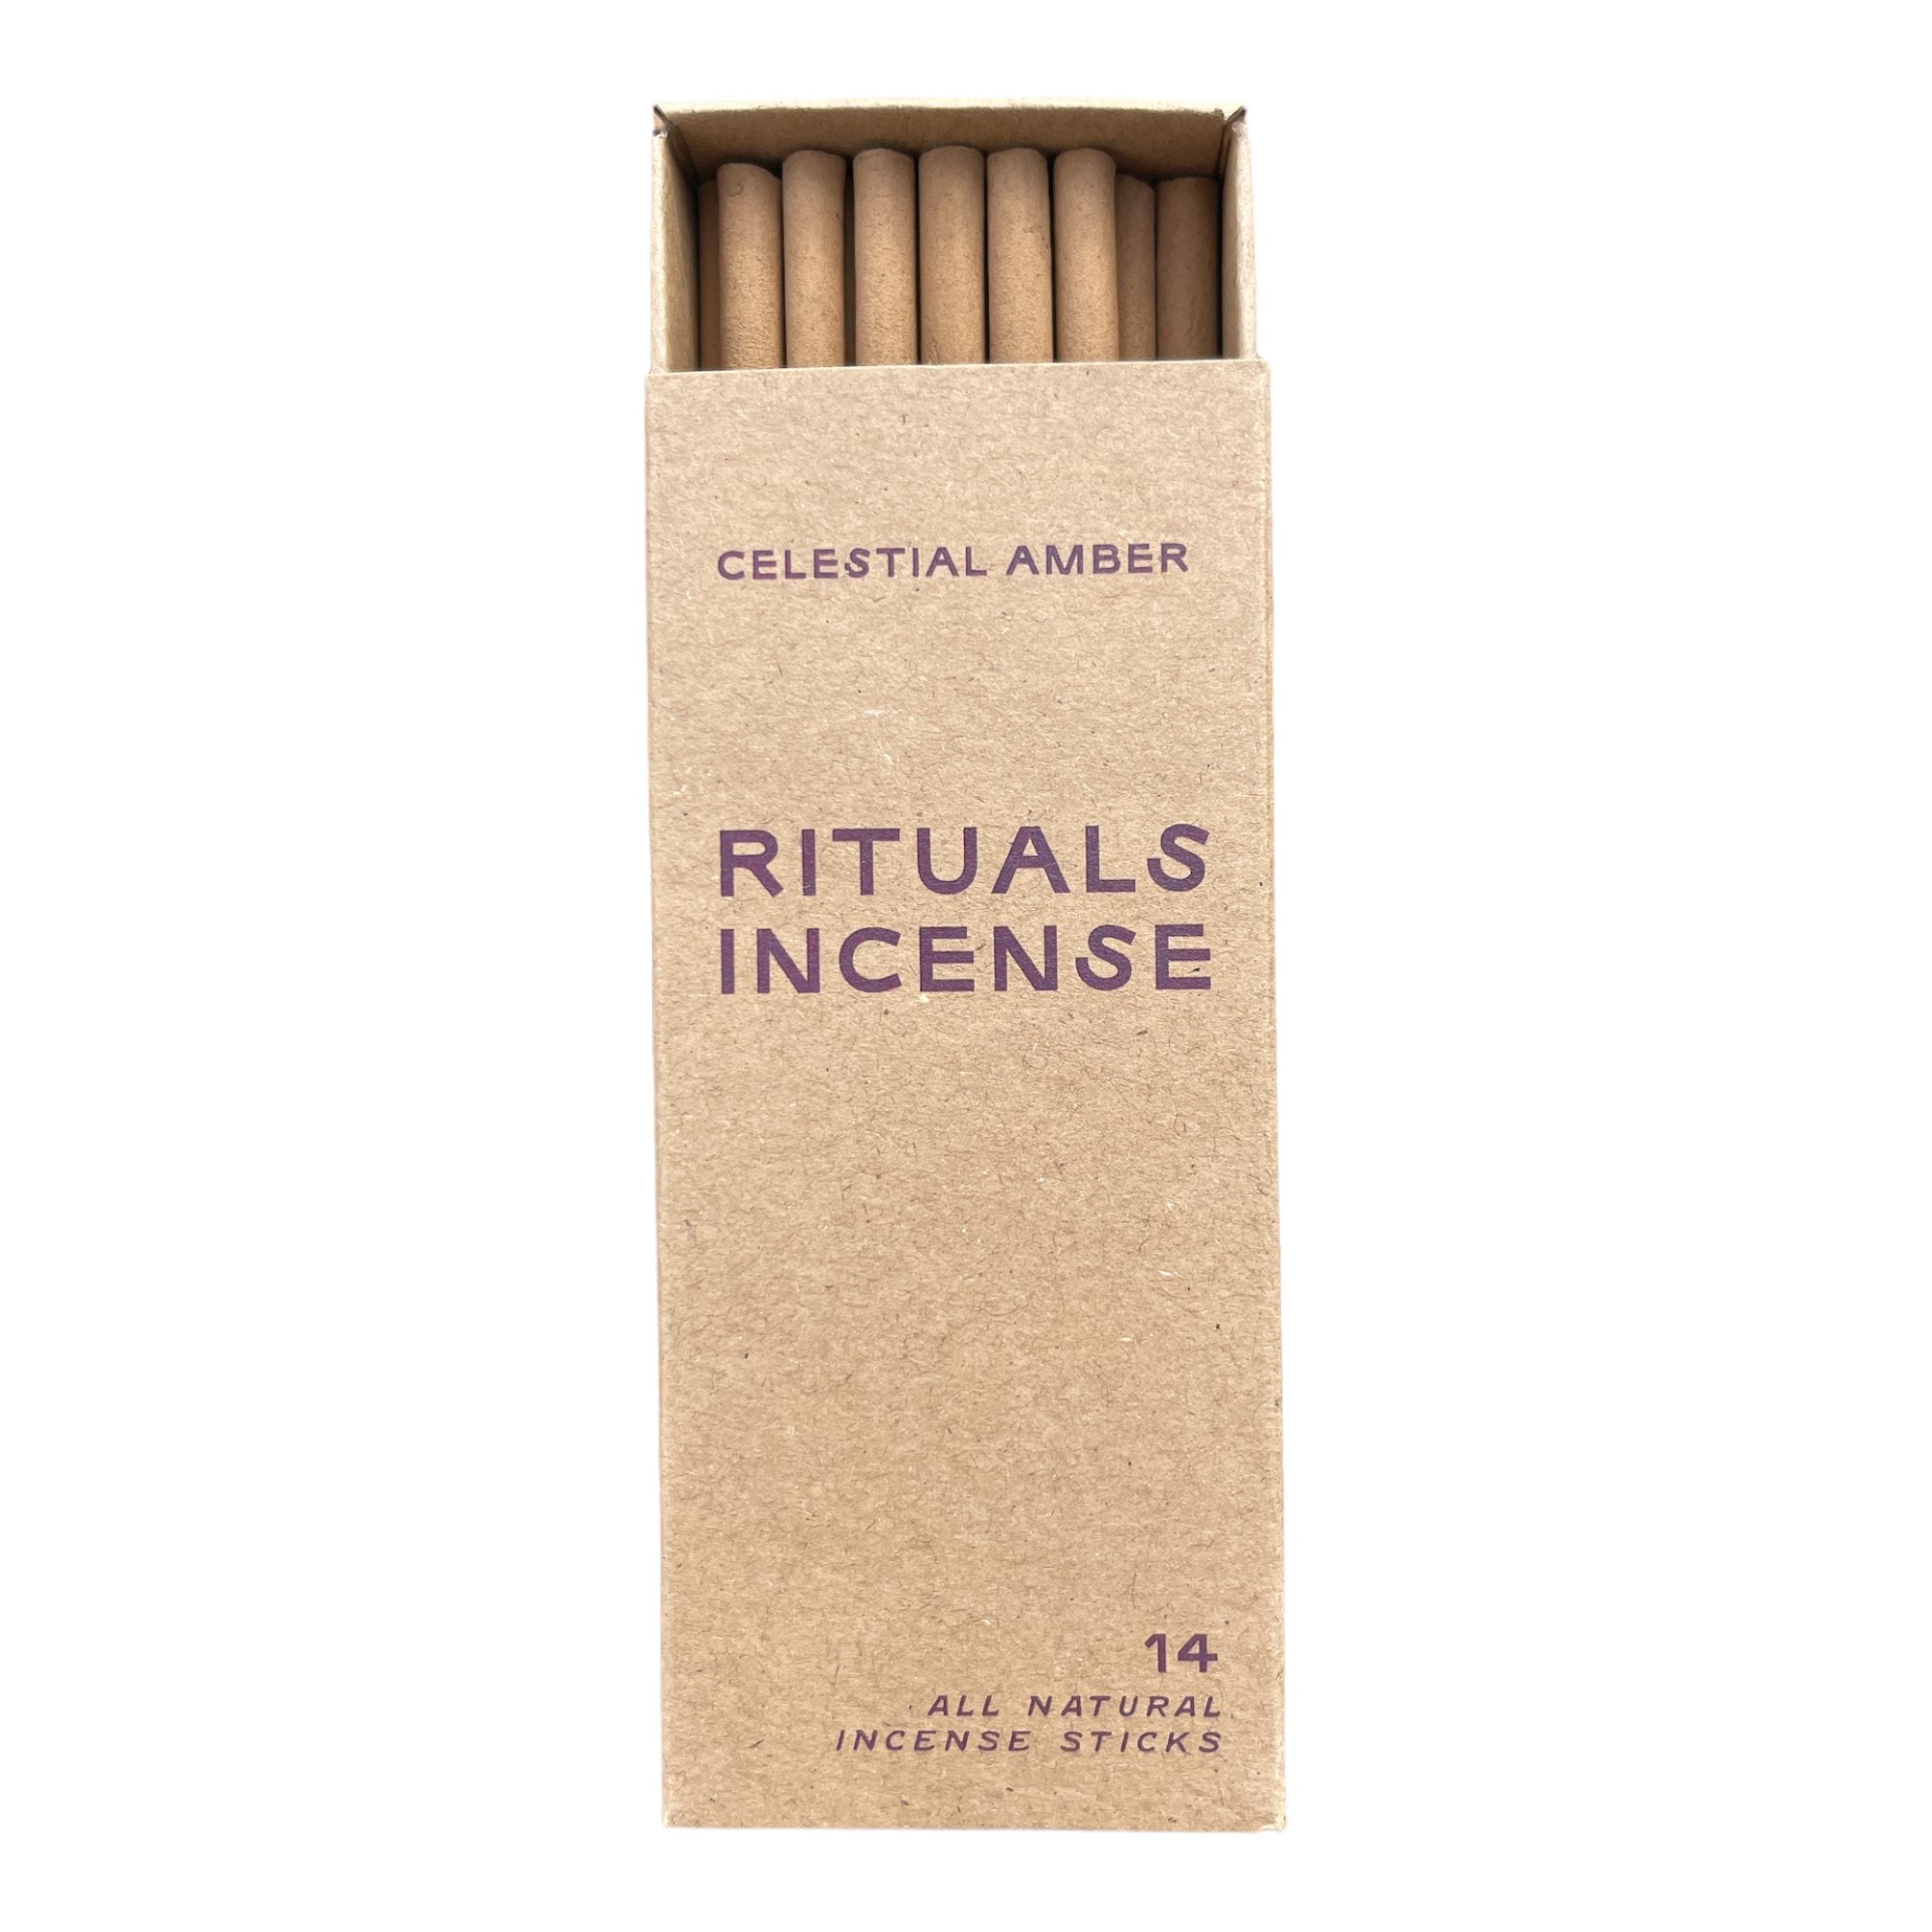 Celestial Amber Incense | 14 Pack RITUALS INCENSE 